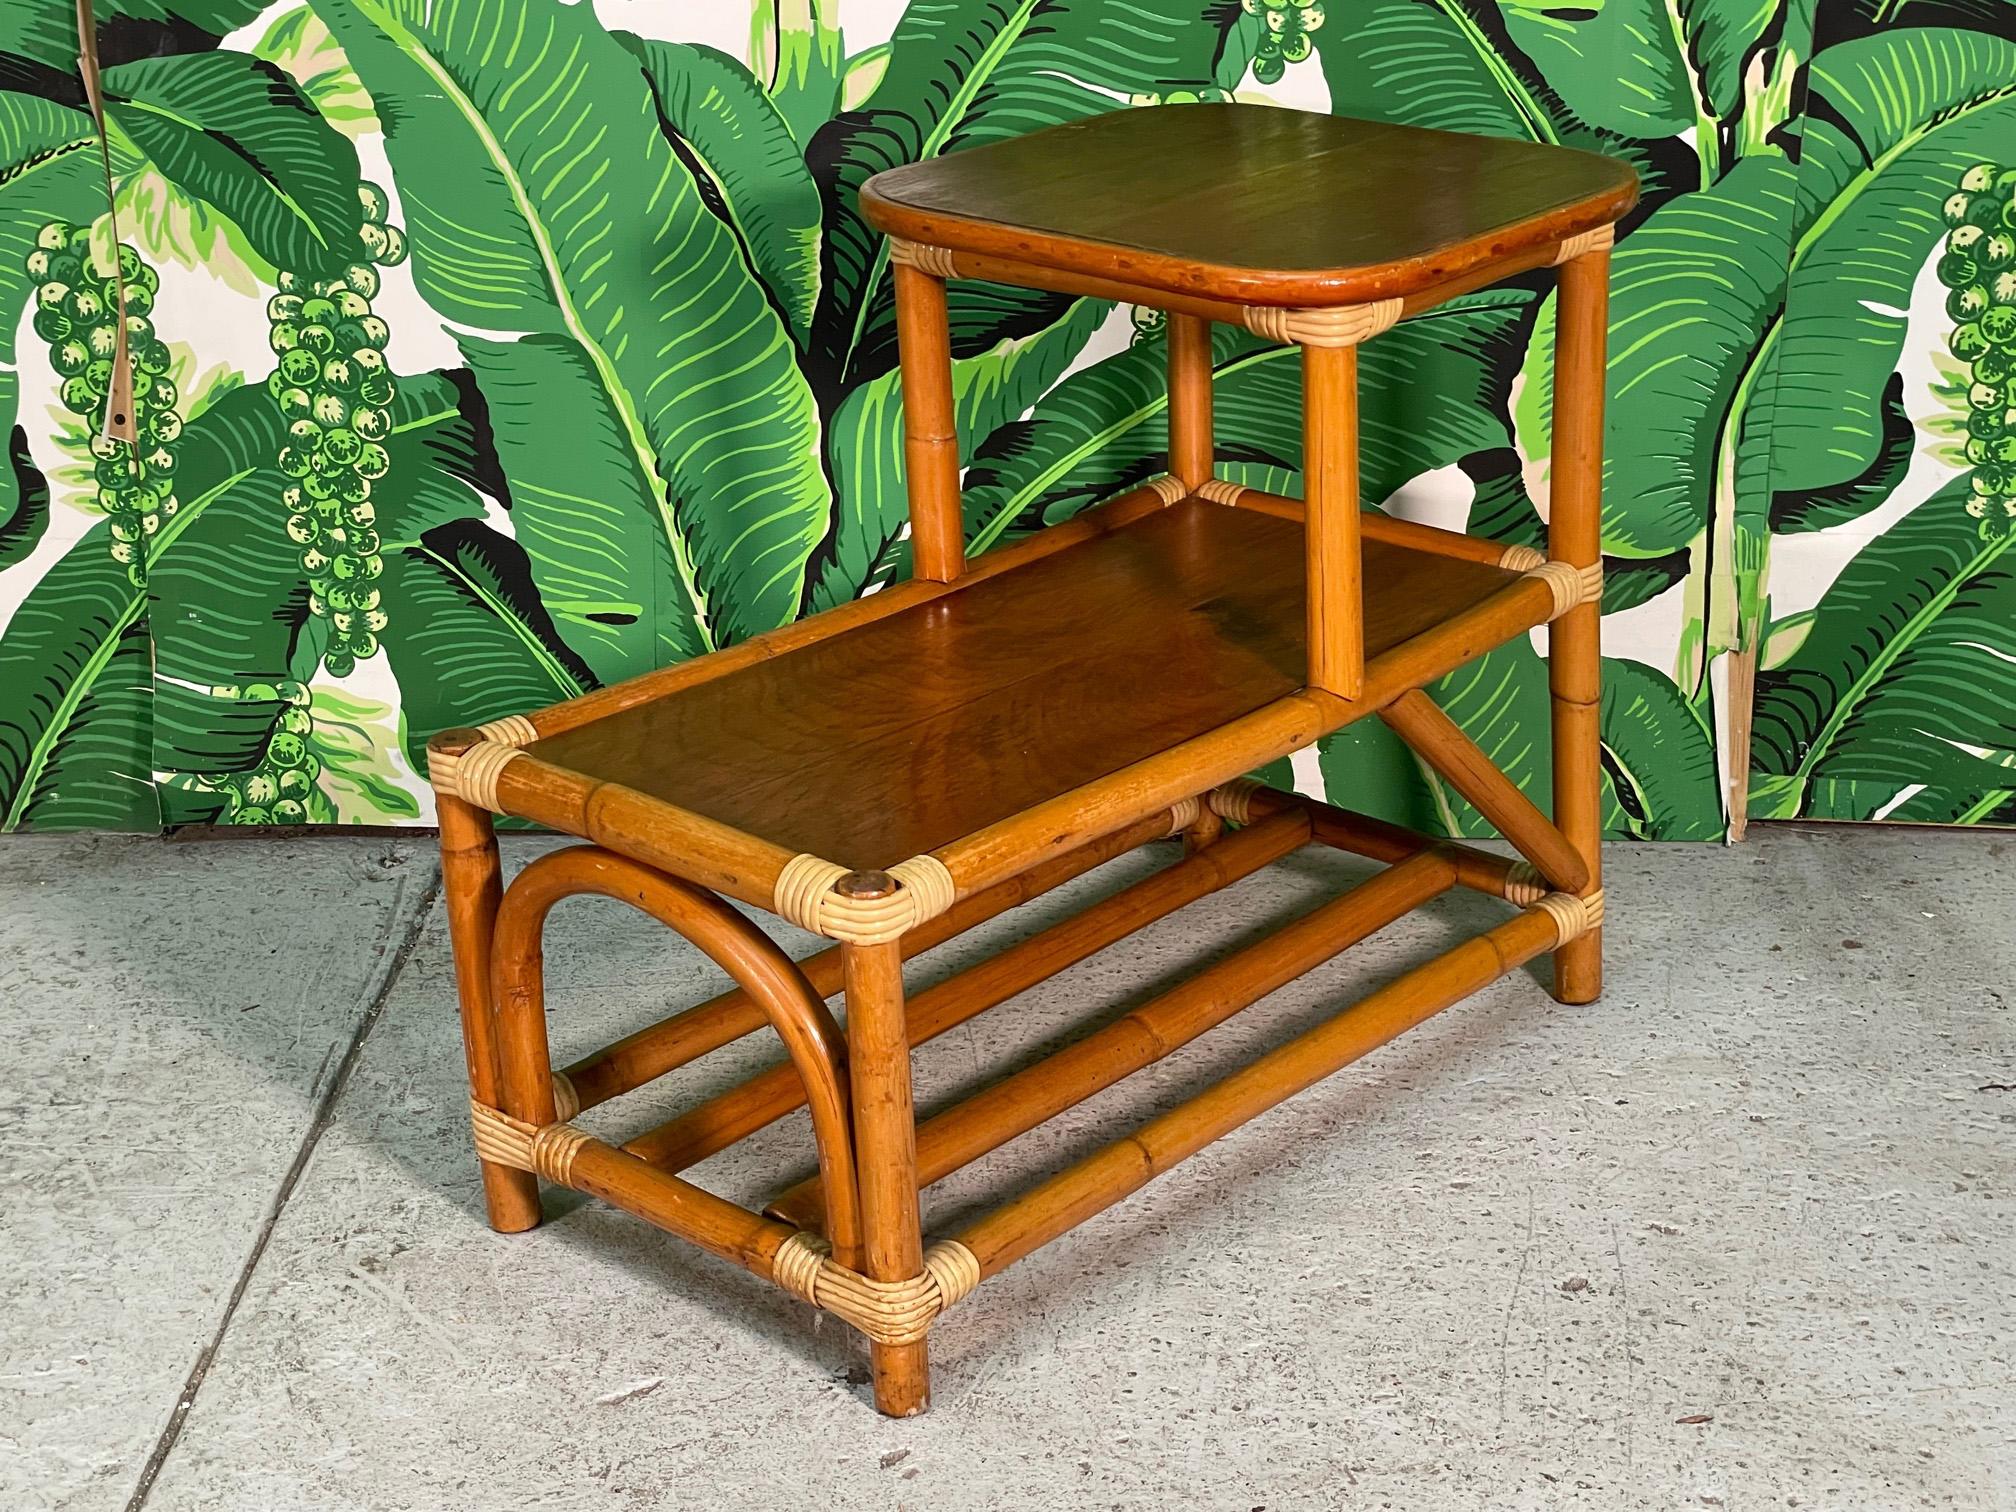 Mid century Rattan two-tiered side table features mohagany tops and contrasting strapping. Horizontal poles between stretchers form lower shelf. Good condition with minor imperfections consistent with age. May exhibit scuffs, marks, or wear, see